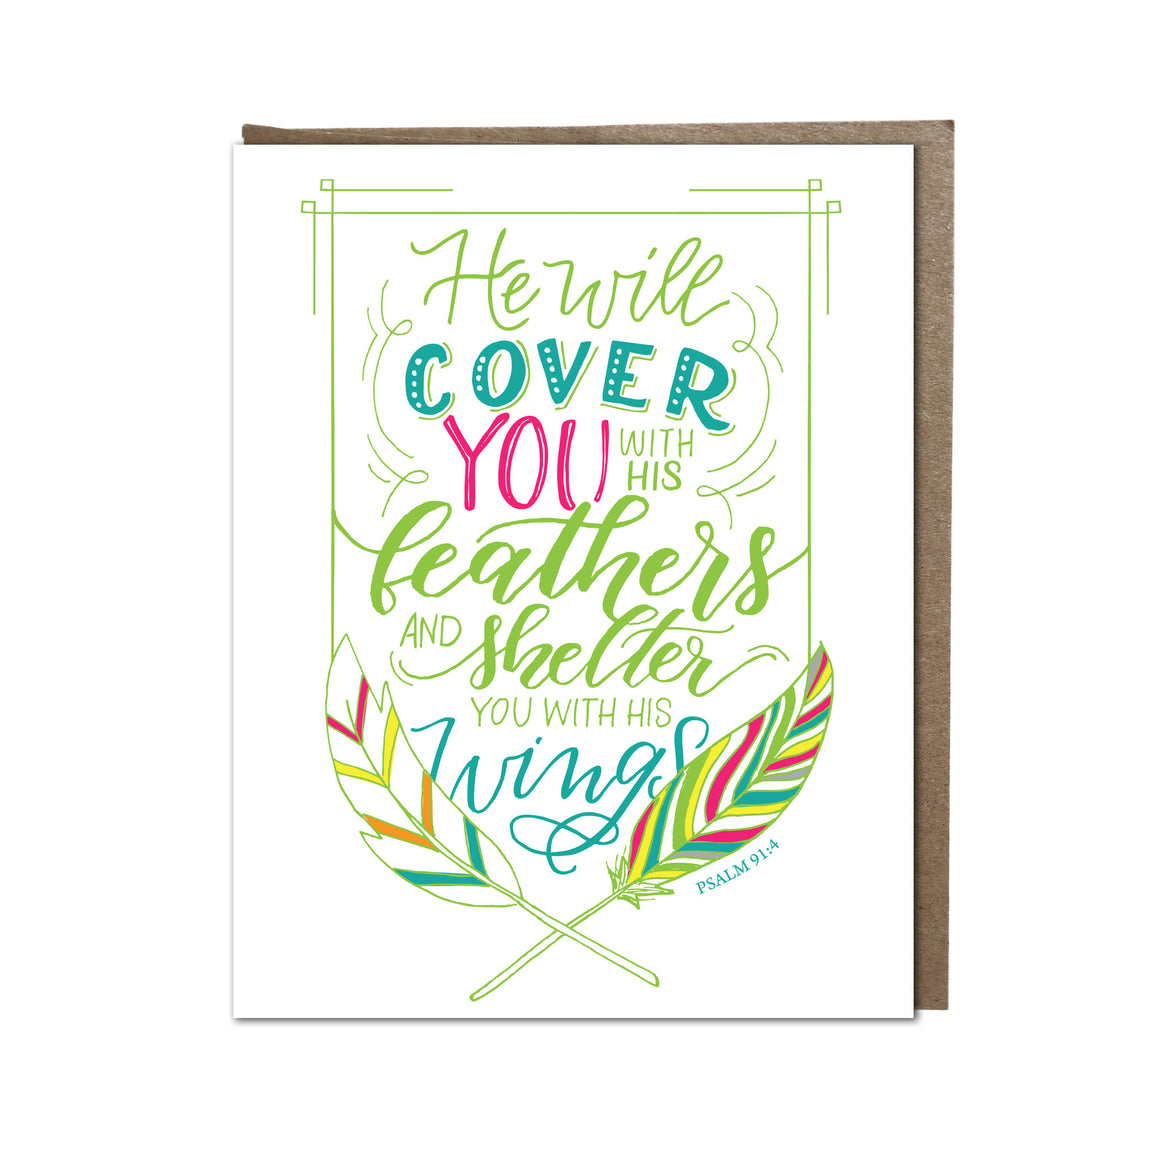 "Feathers" card